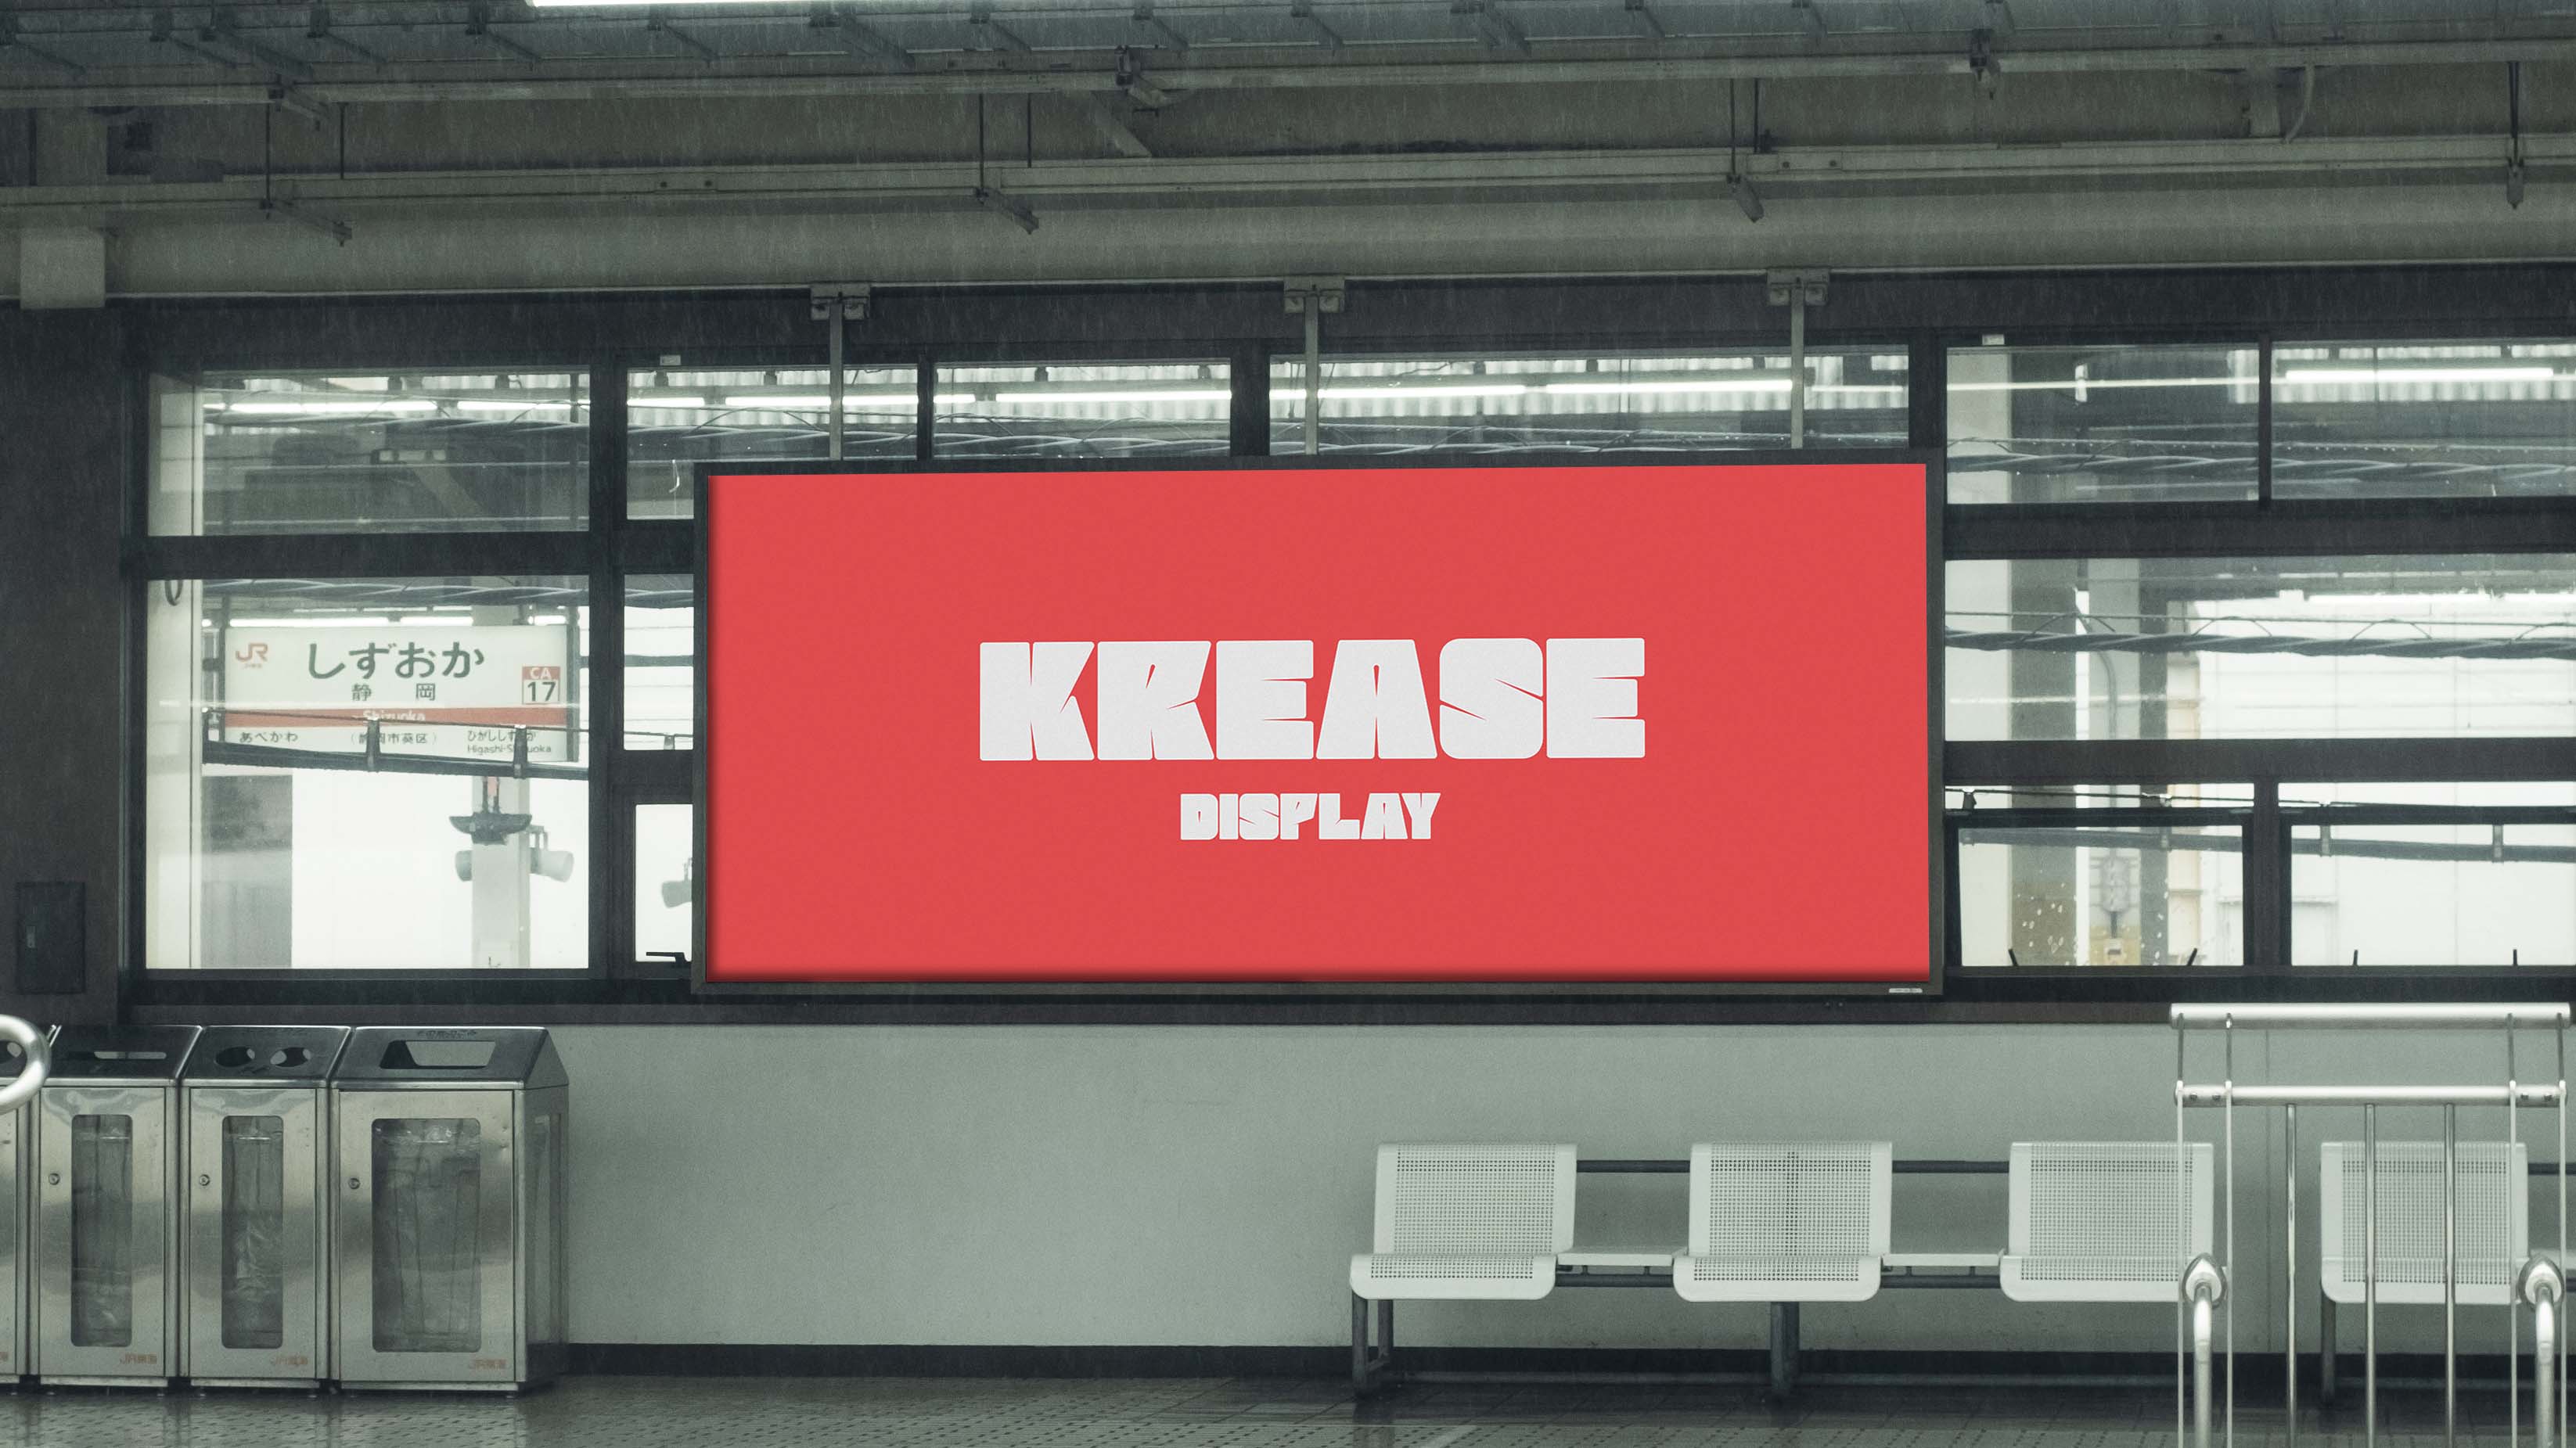 A billboard for the typeface Krease Display